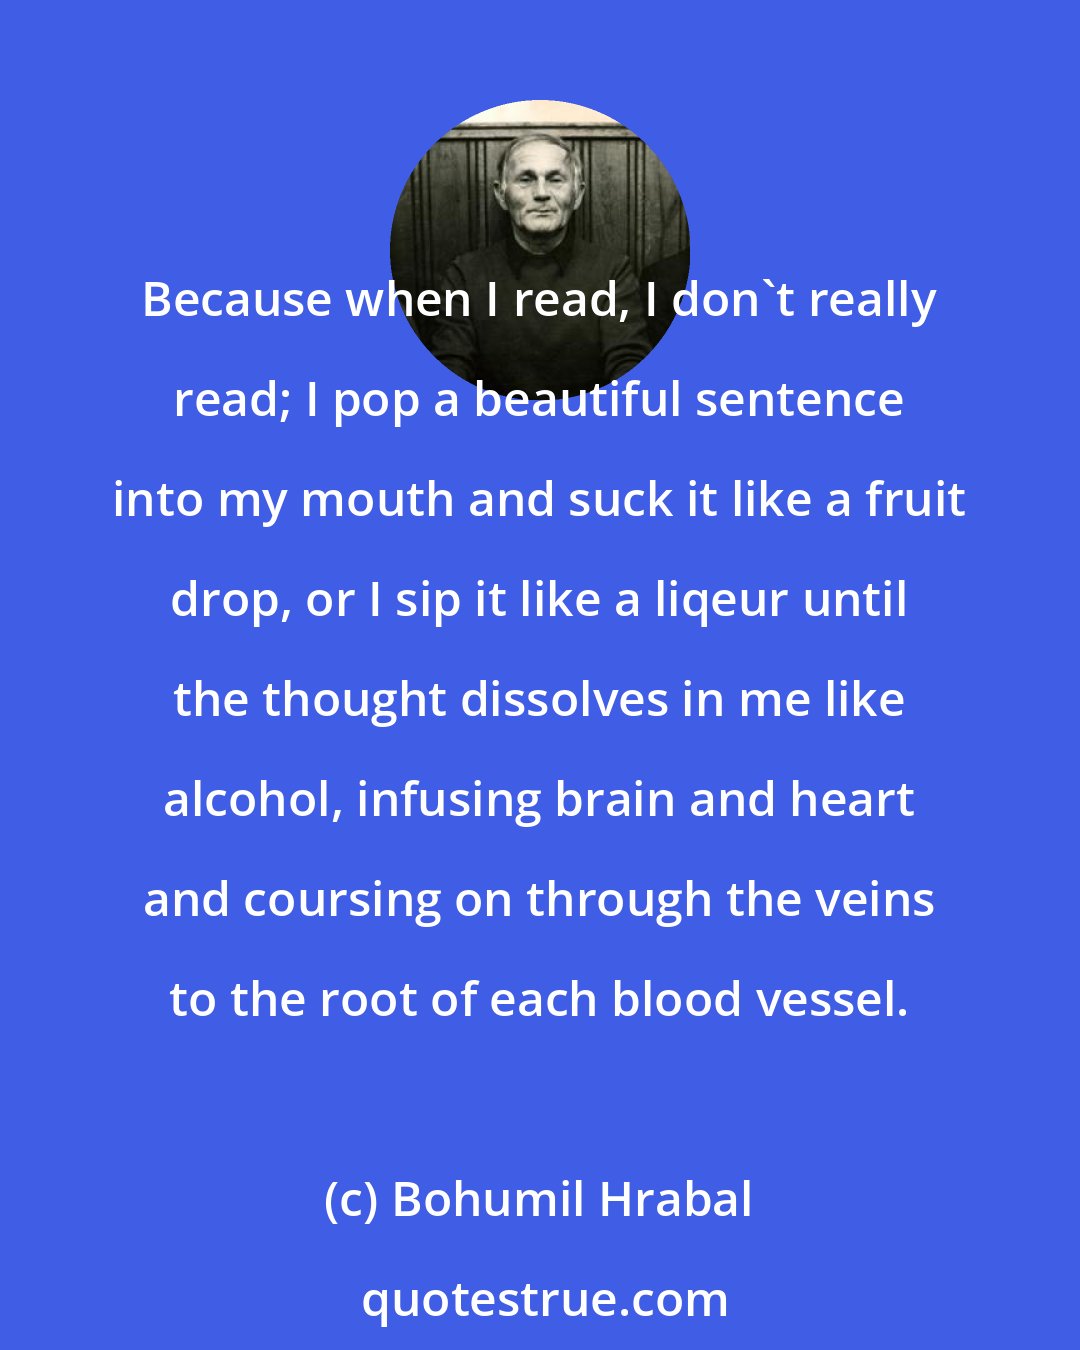 Bohumil Hrabal: Because when I read, I don't really read; I pop a beautiful sentence into my mouth and suck it like a fruit drop, or I sip it like a liqeur until the thought dissolves in me like alcohol, infusing brain and heart and coursing on through the veins to the root of each blood vessel.